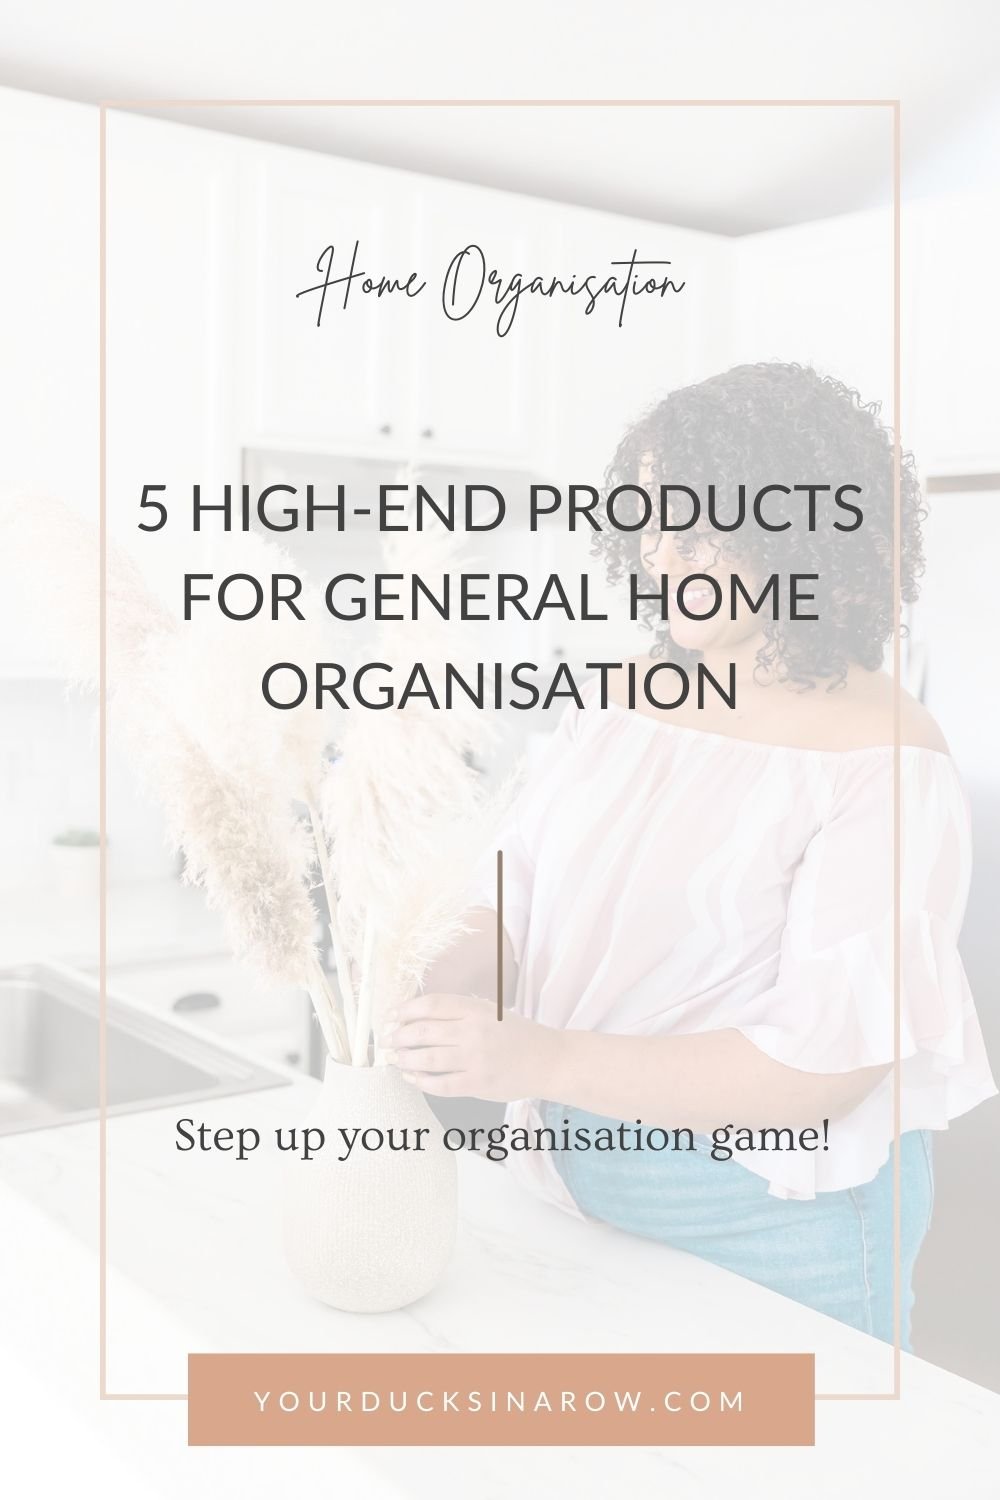 5 Top High-end Products for Home Organisation